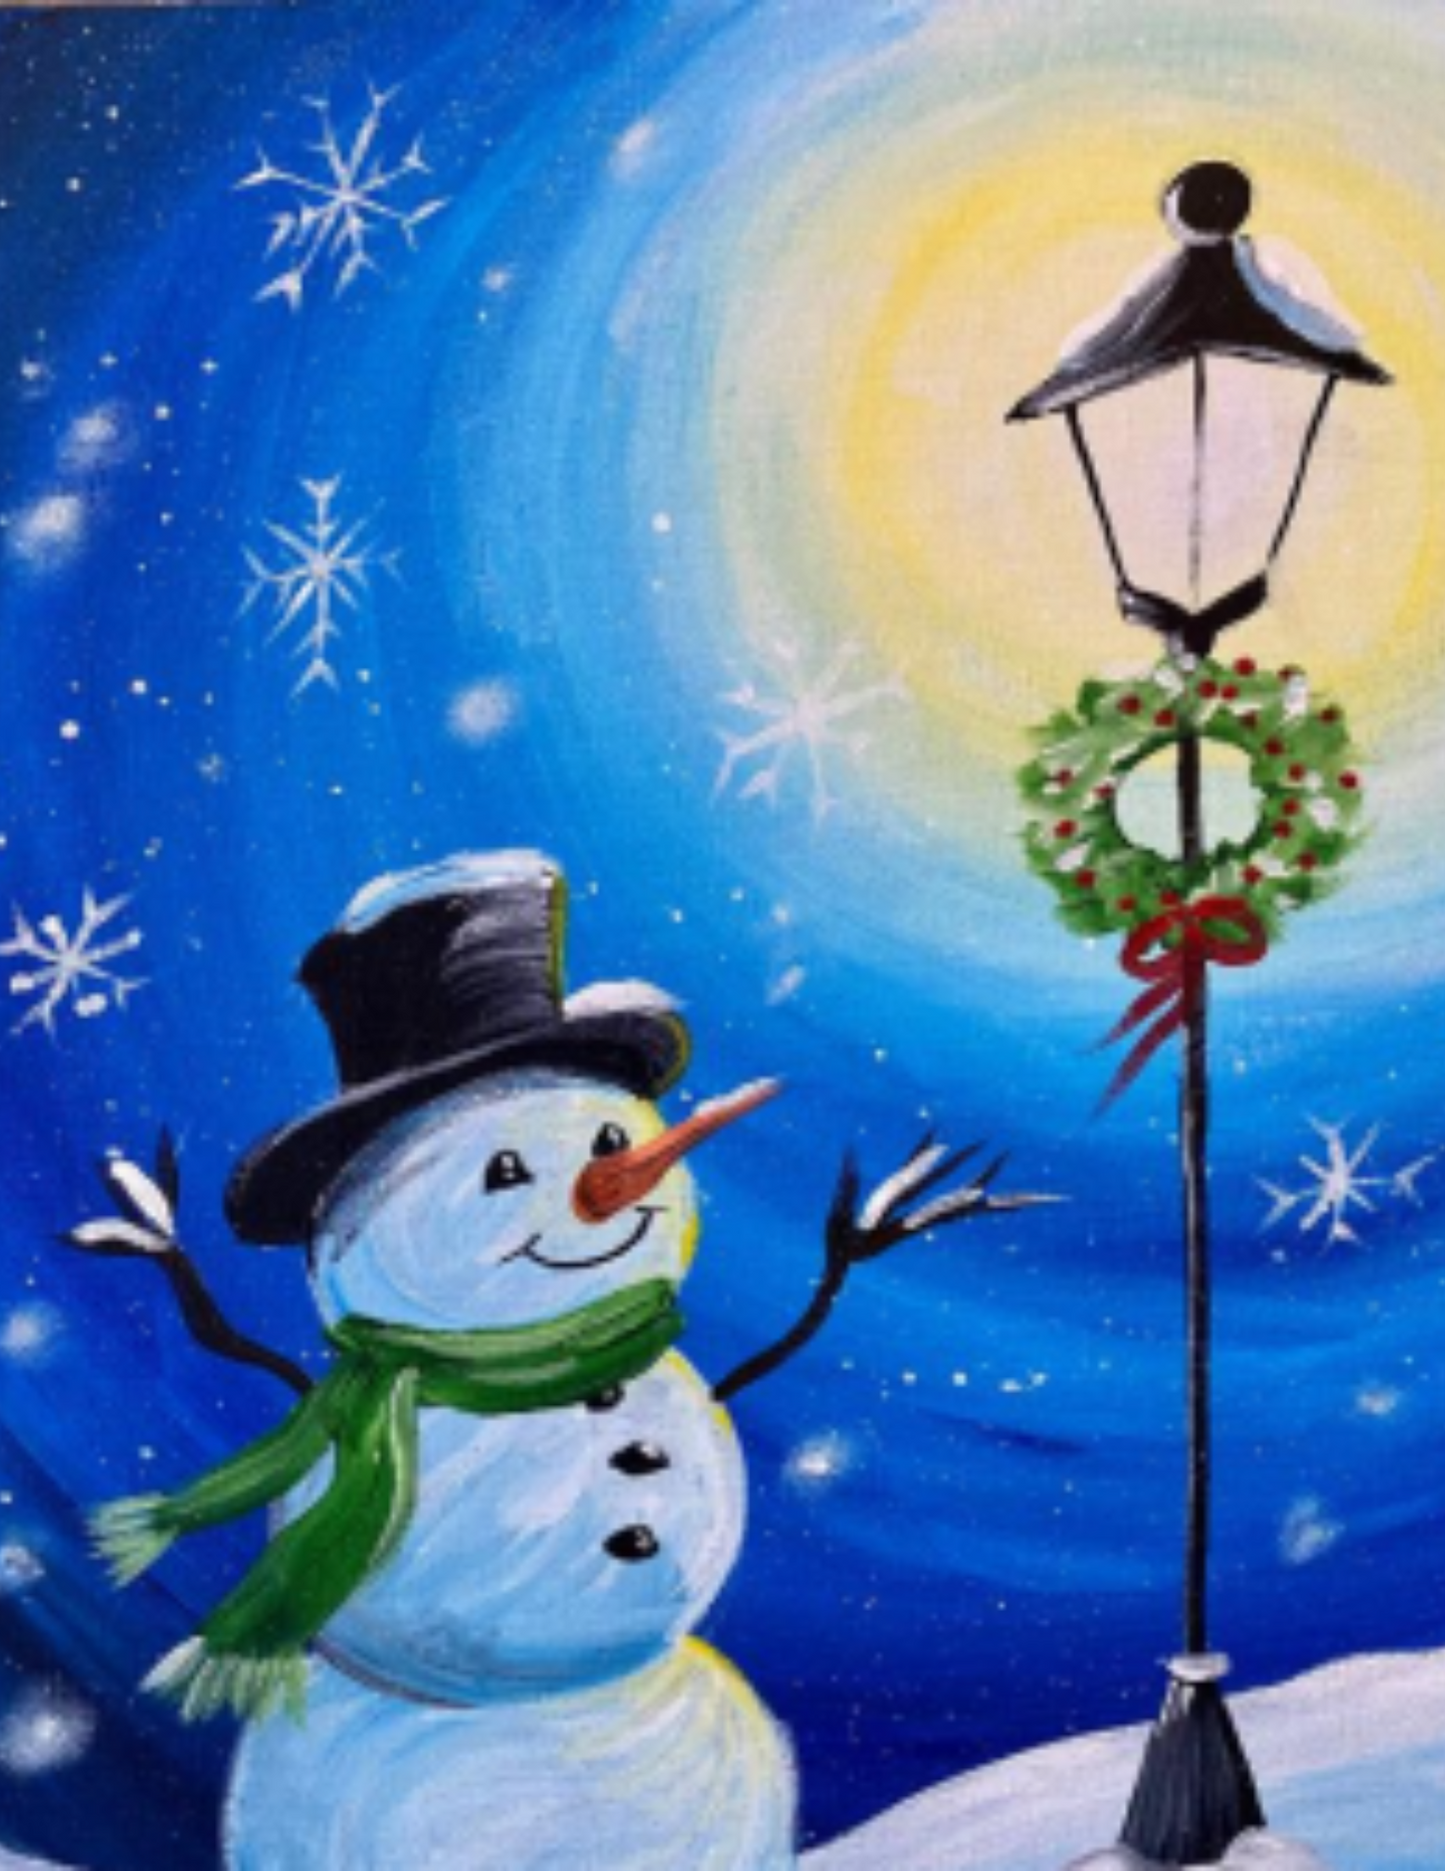 Snowman Light Post Step By Step Painting Tutorial